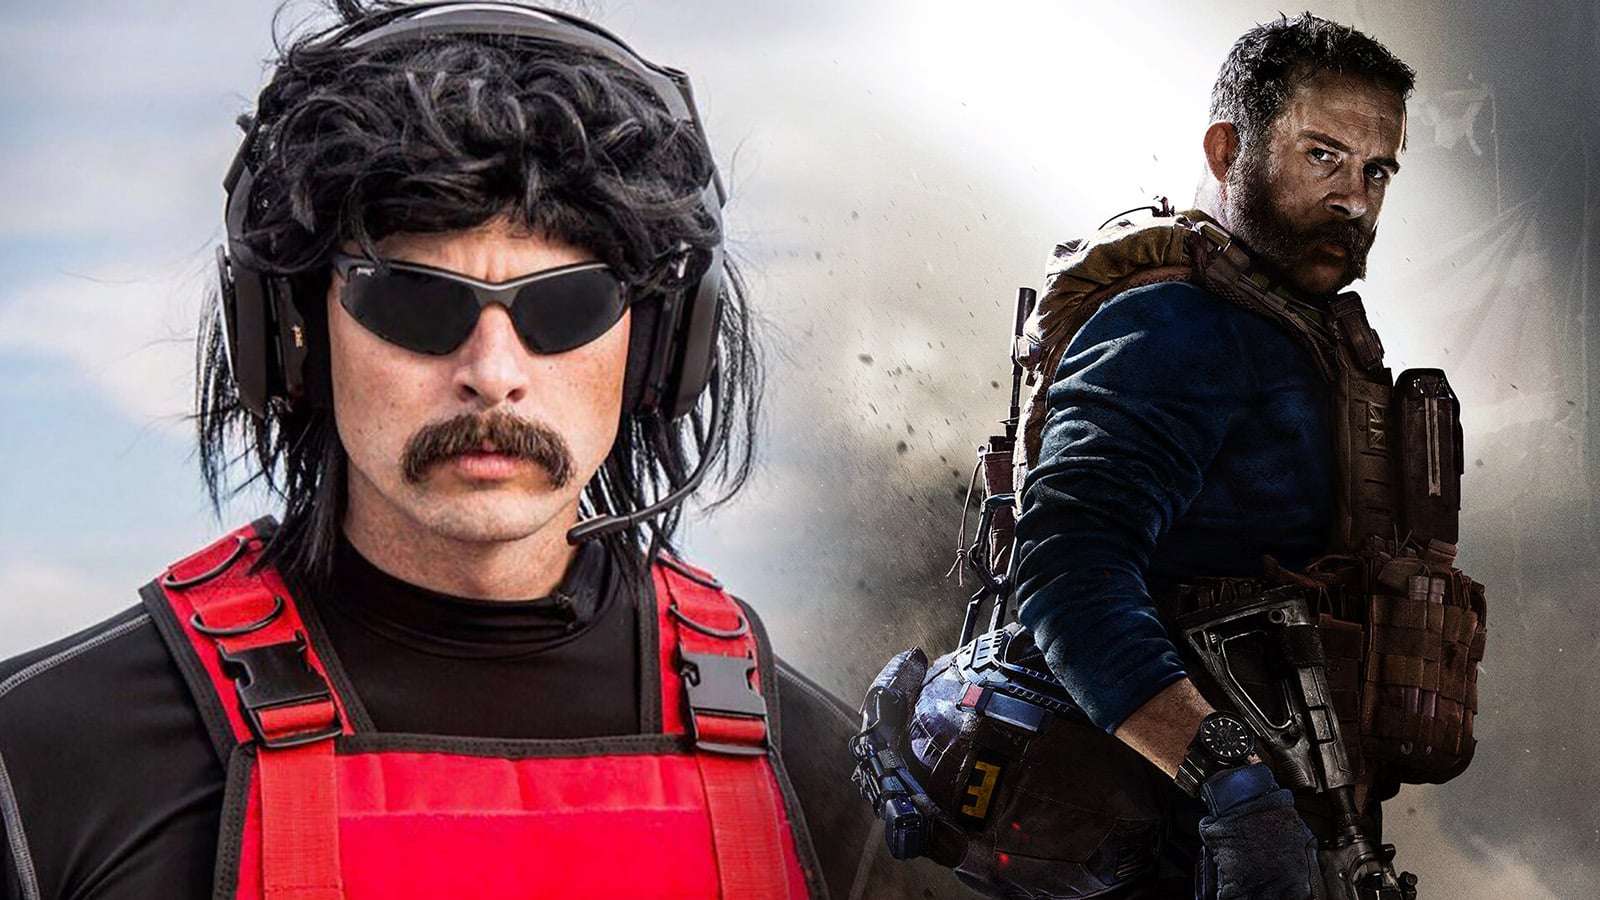 Dr Disrespect with Captain Price from CoD